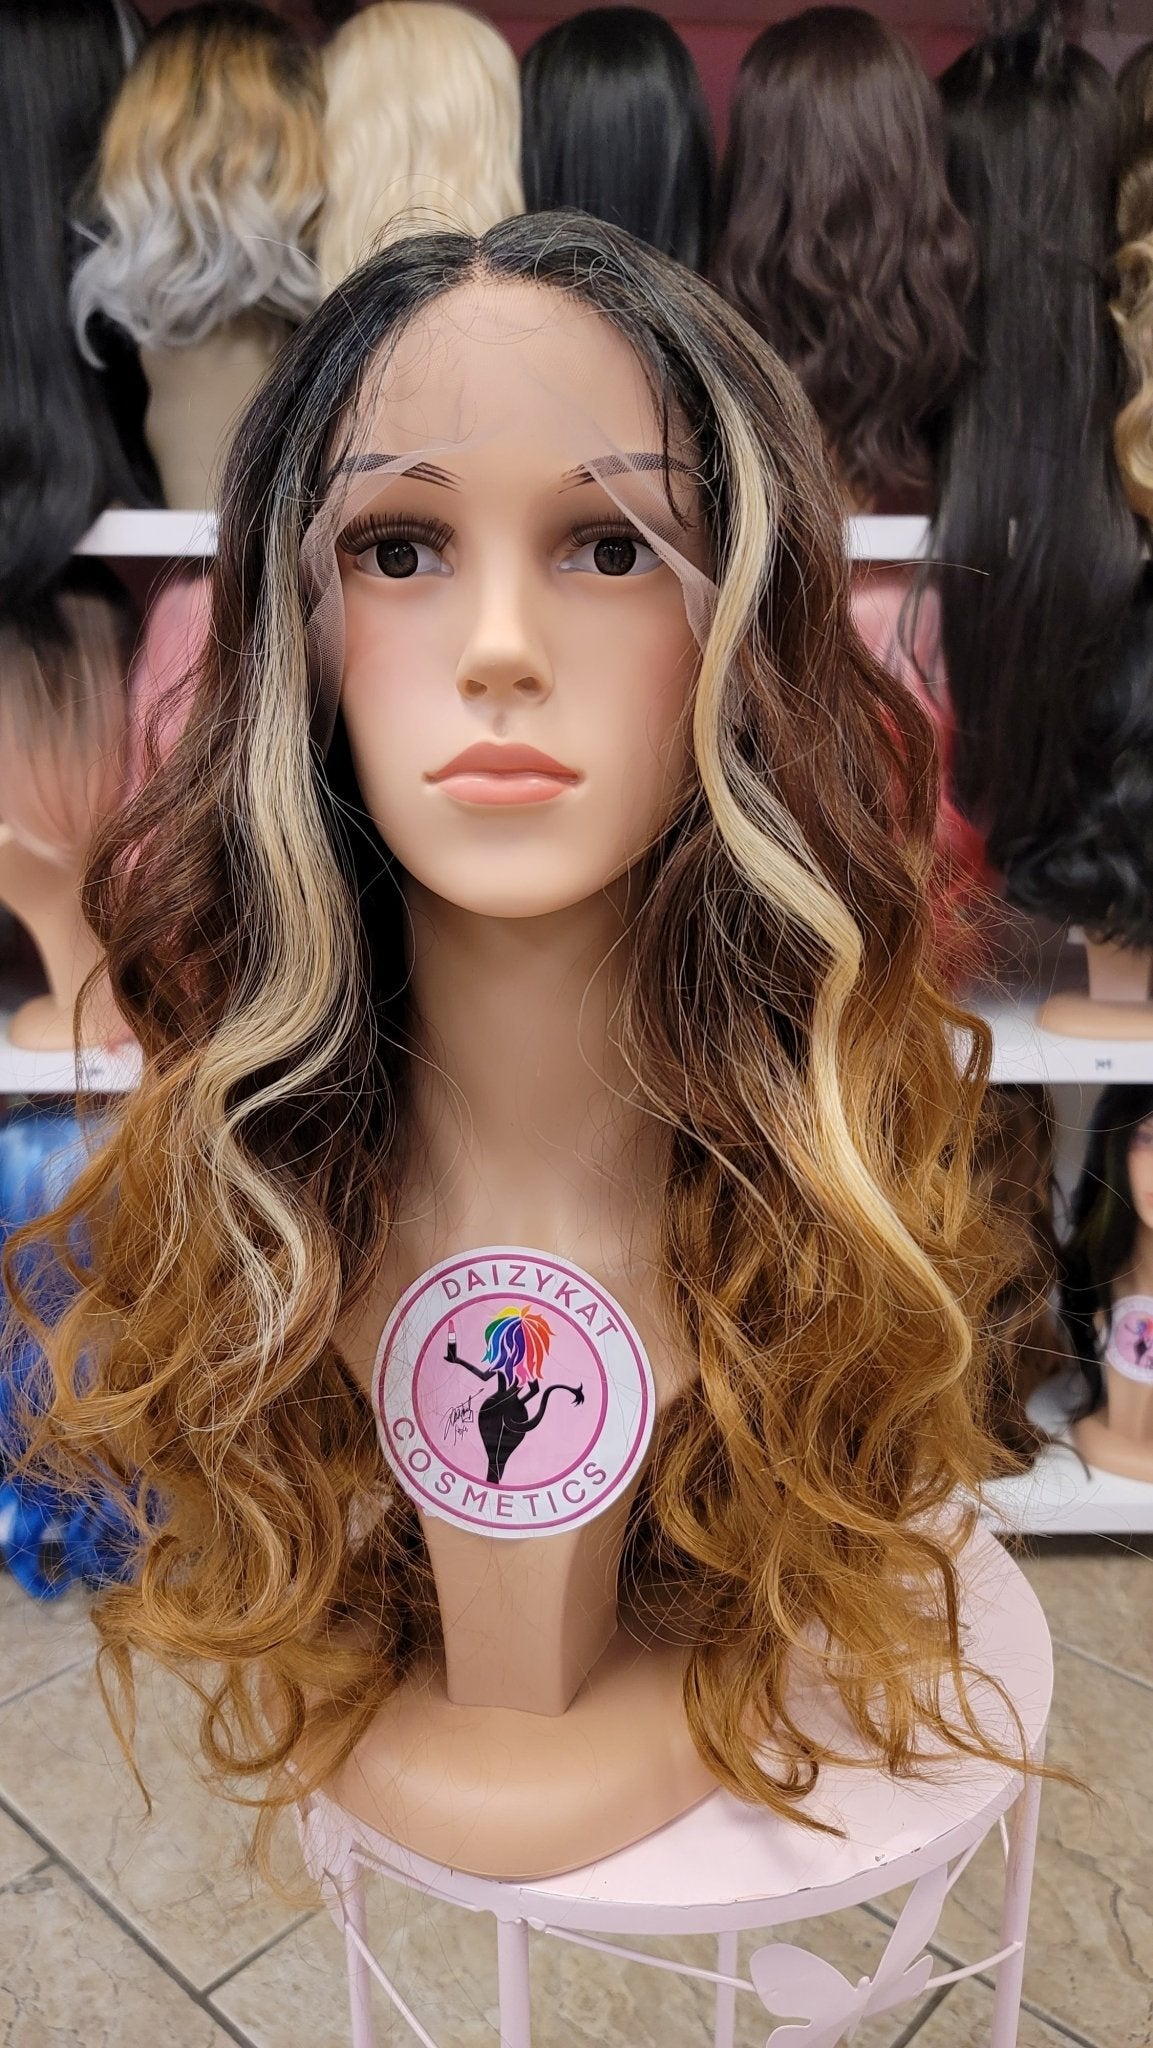 35 Katie - Middle Part Lace Front Wig - 27/4 - DaizyKat Cosmetics 35 Katie - Middle Part Lace Front Wig - 27/4 DaizyKat Cosmetics Wigs